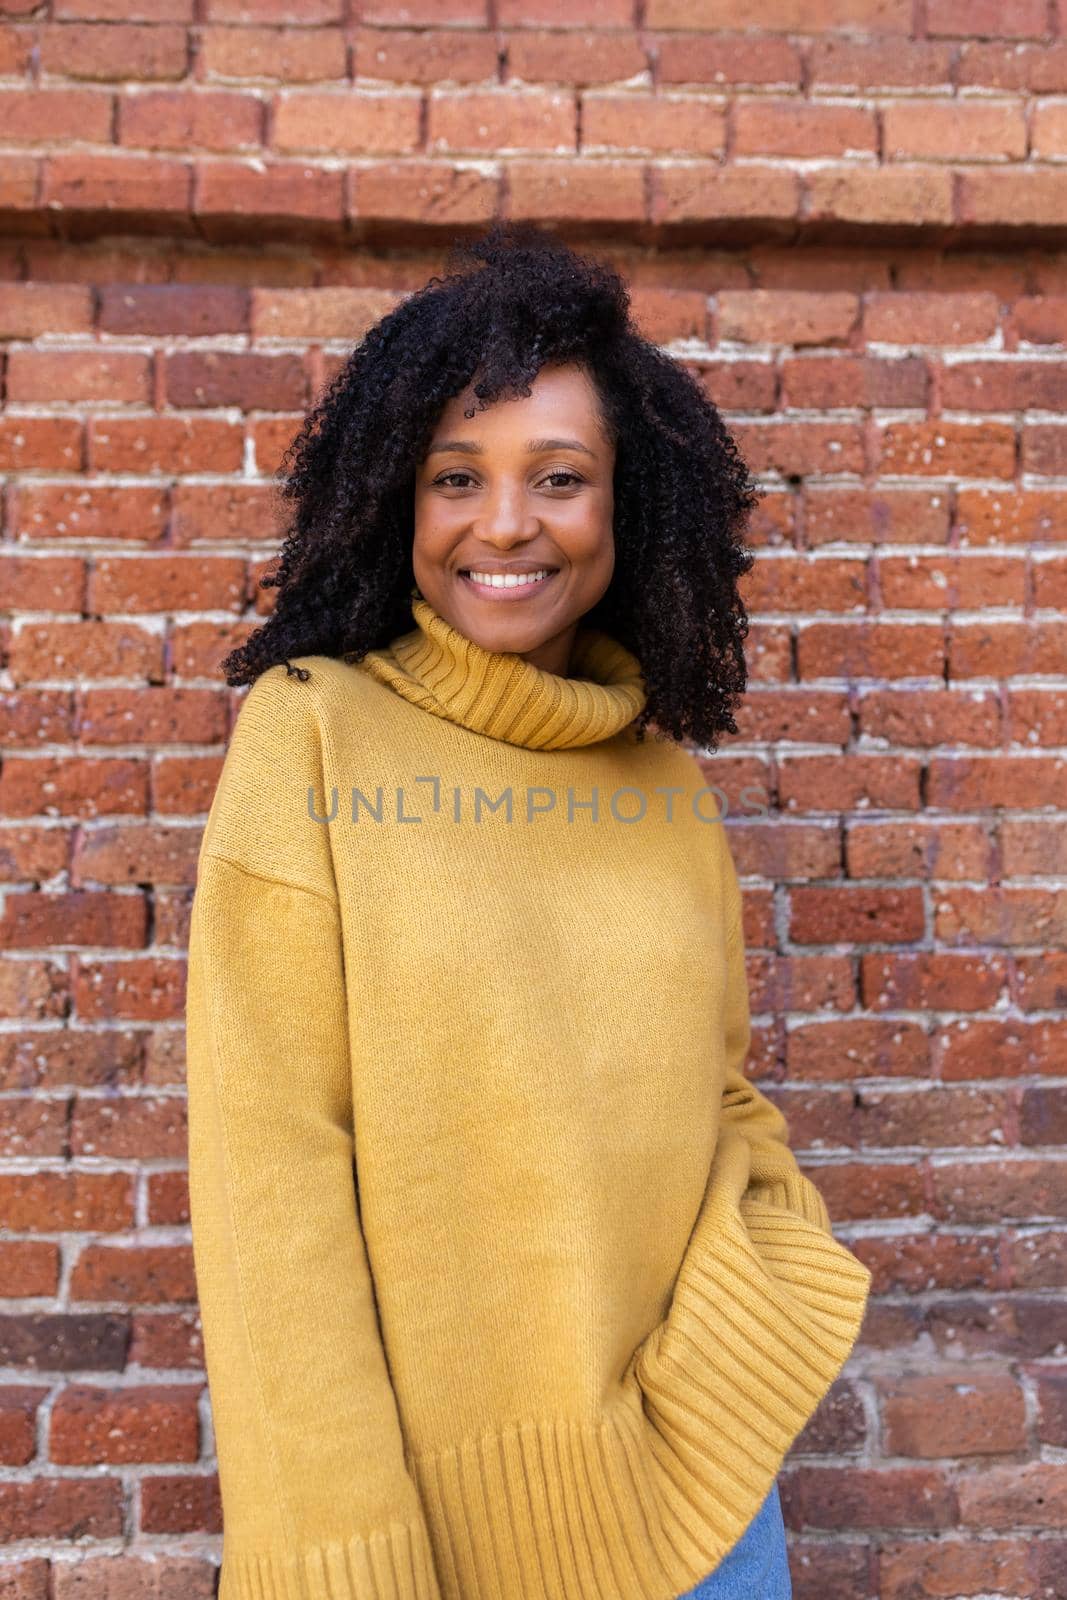 Vertical portrait of African American woman with curly hair wearing yellow sweater. Brick background wall. by Hoverstock